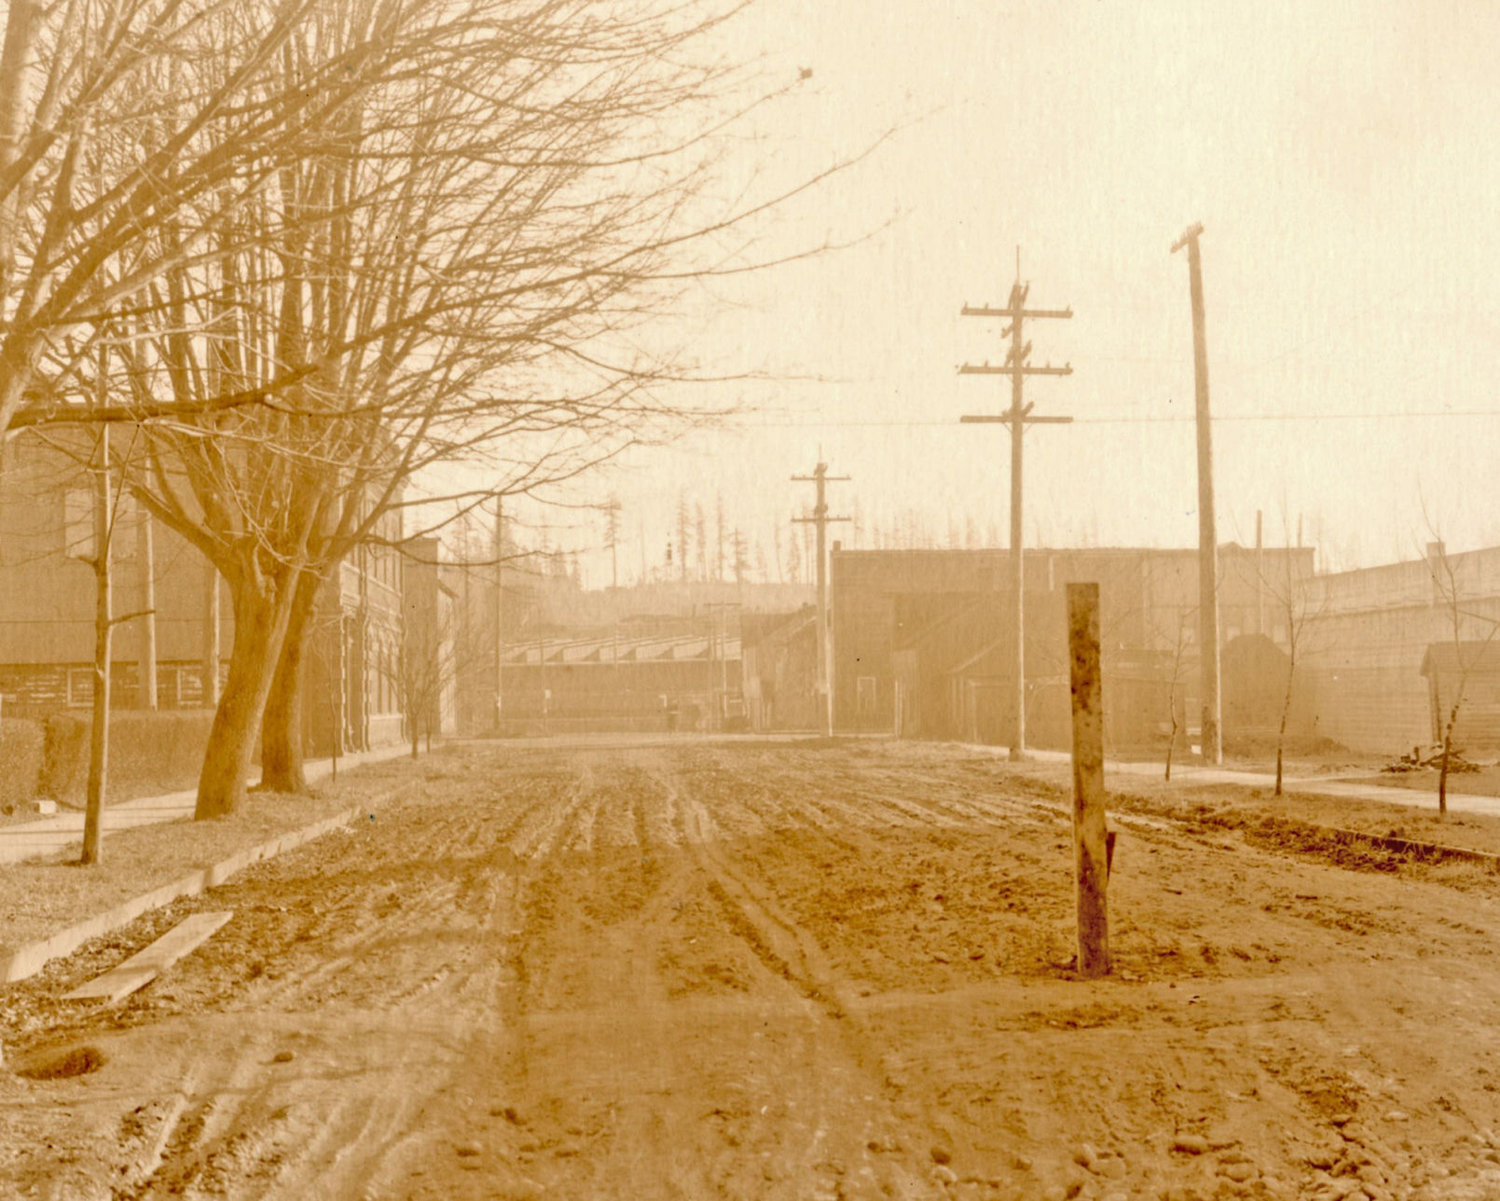 This photo taken in downtown Centralia was used during the trials following the Armistice Day Tragedy of 1919 and is part of a larger collection of artifacts to be used to mark the 100th anniversary.